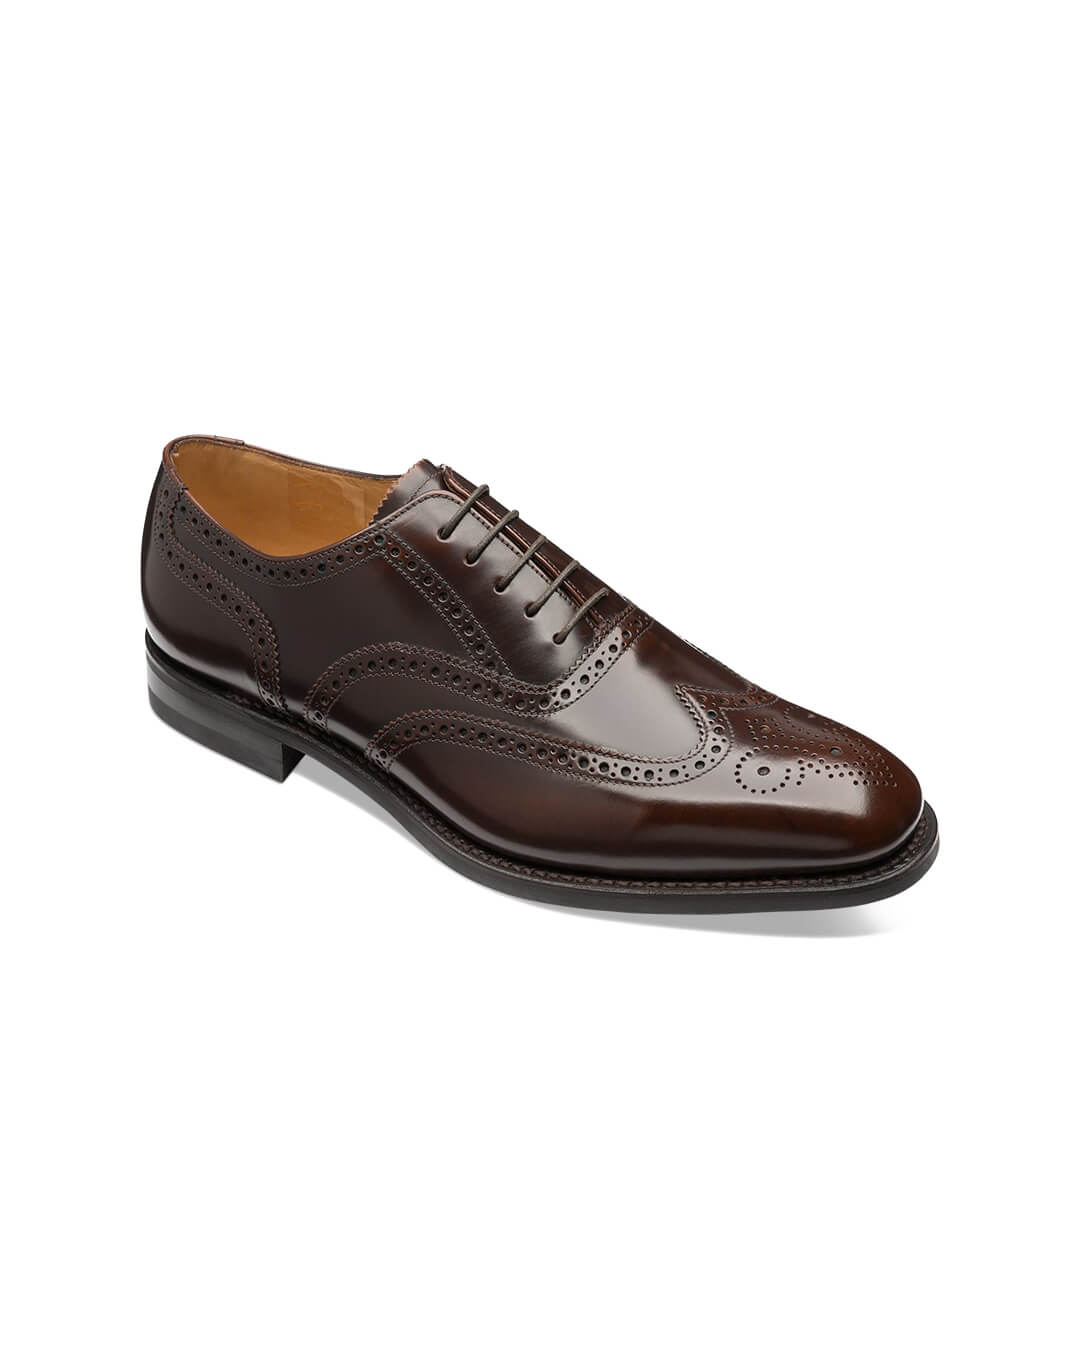 Loake Shoes Loake Brown 302 Oford Wingtip Brogues Shoes